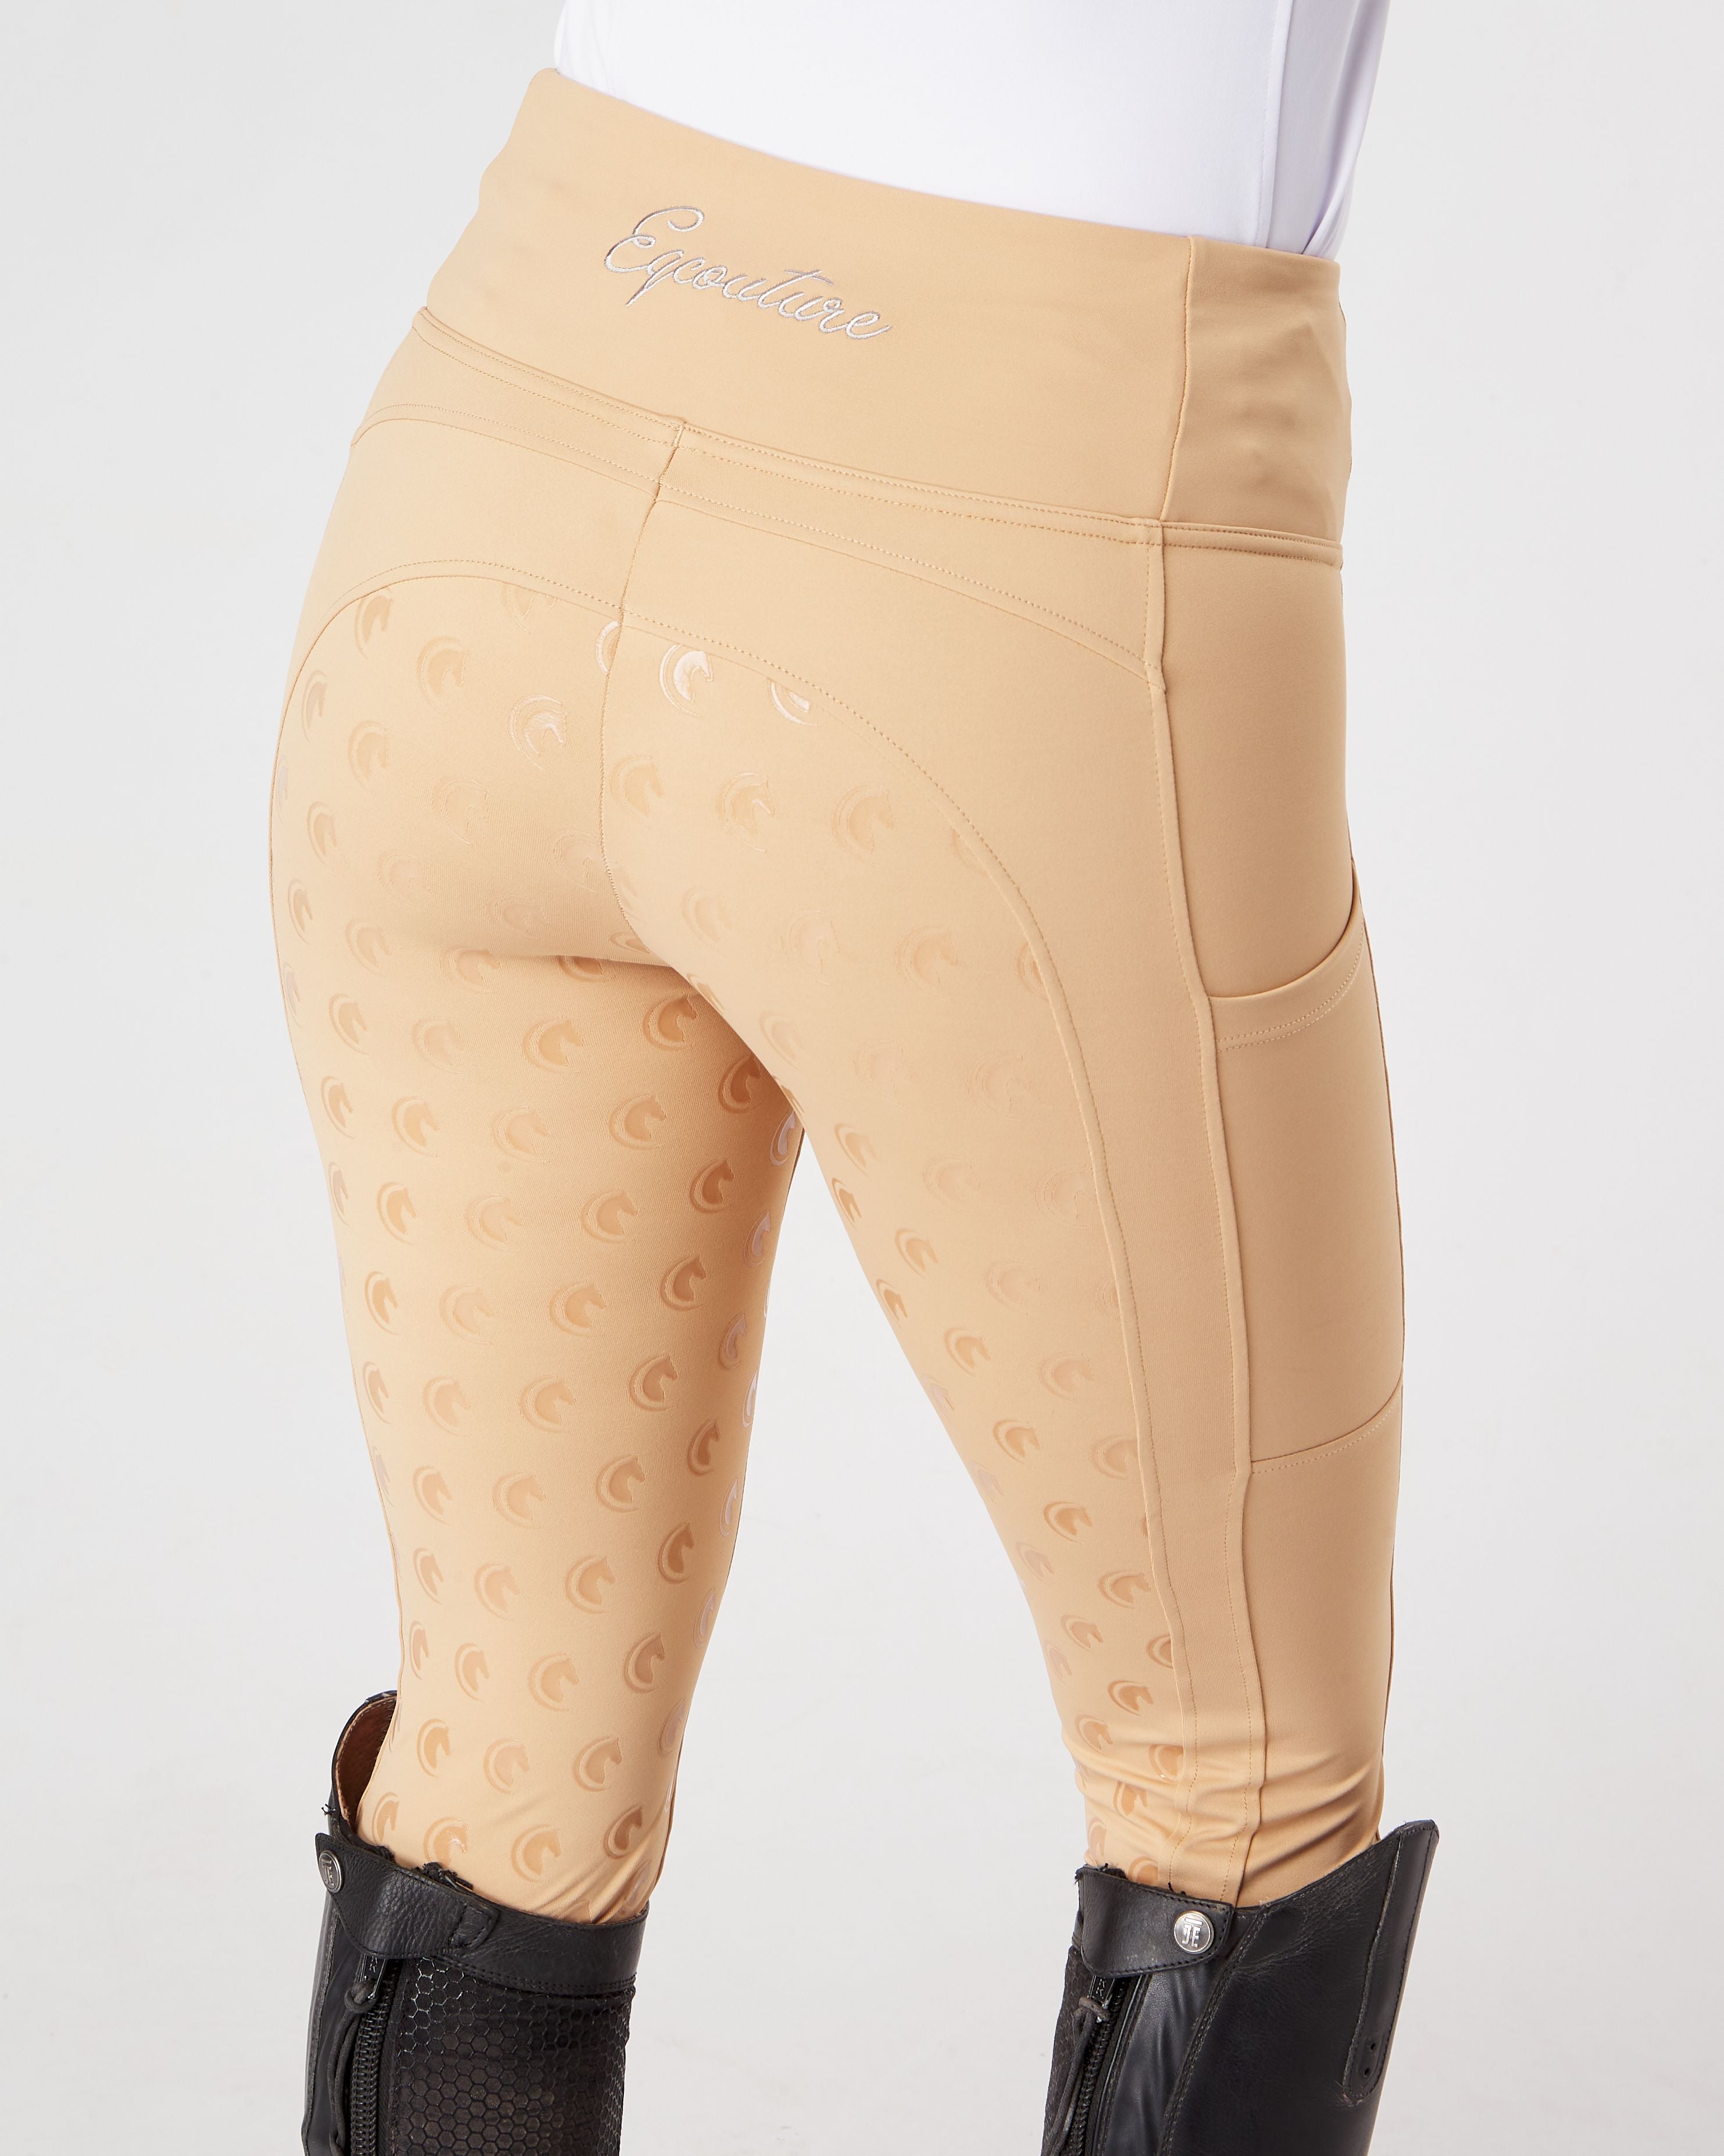 Horse Riding Competition Leggings / Tights / Breeches with phone